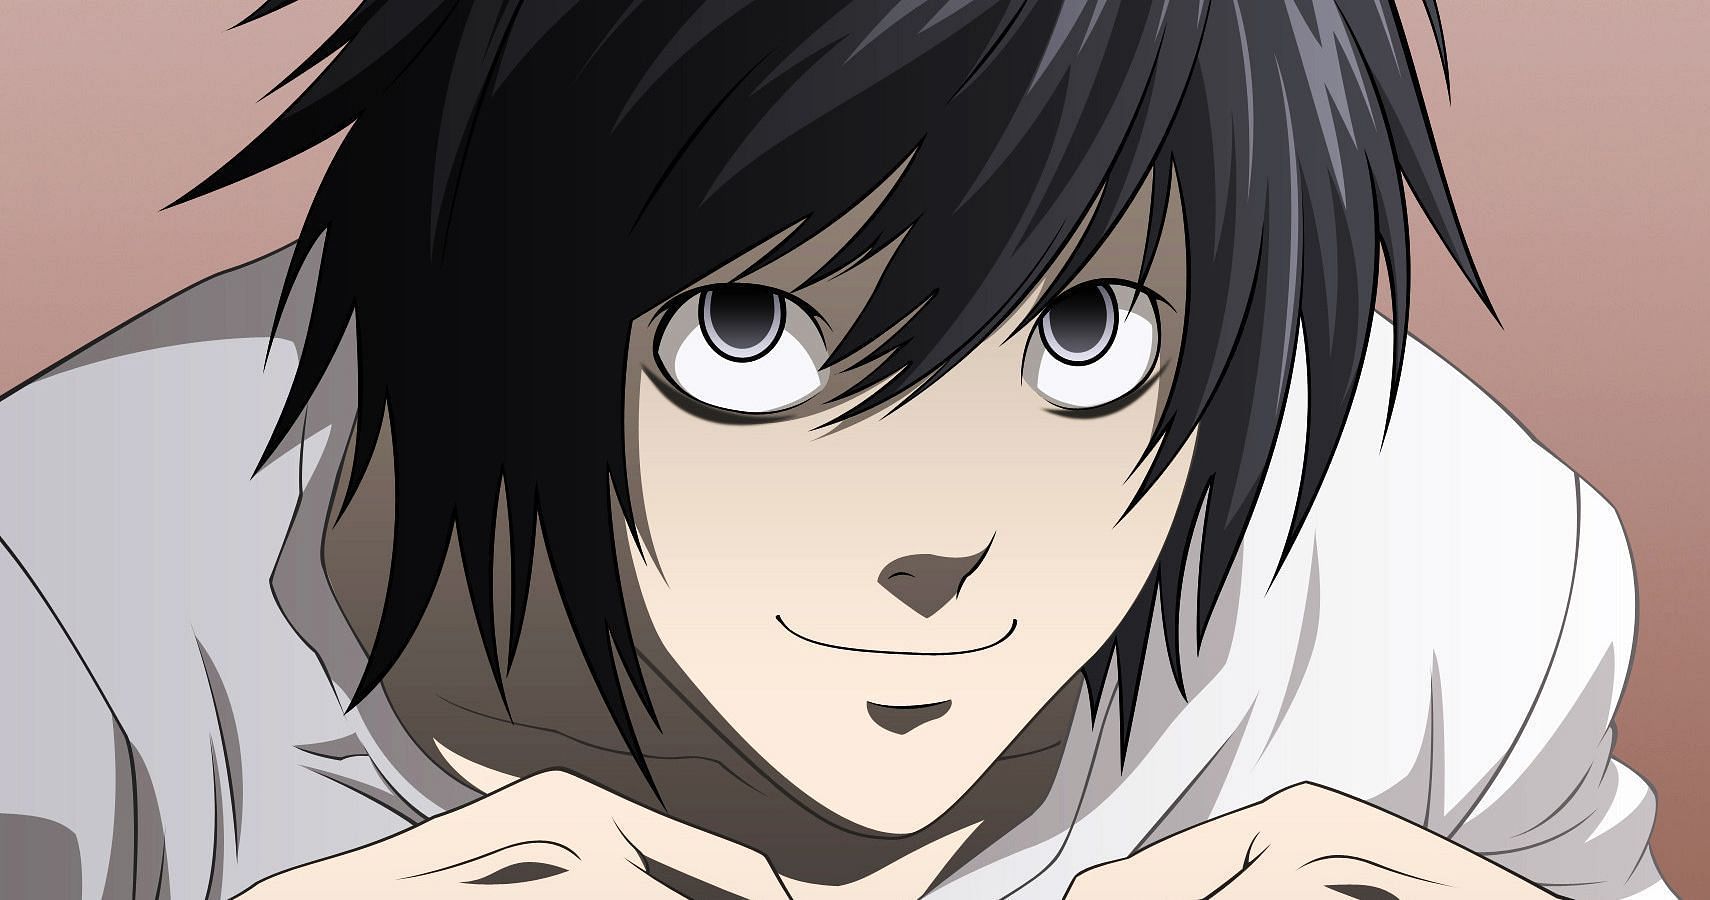 L from Death Note (image via Madhouse)